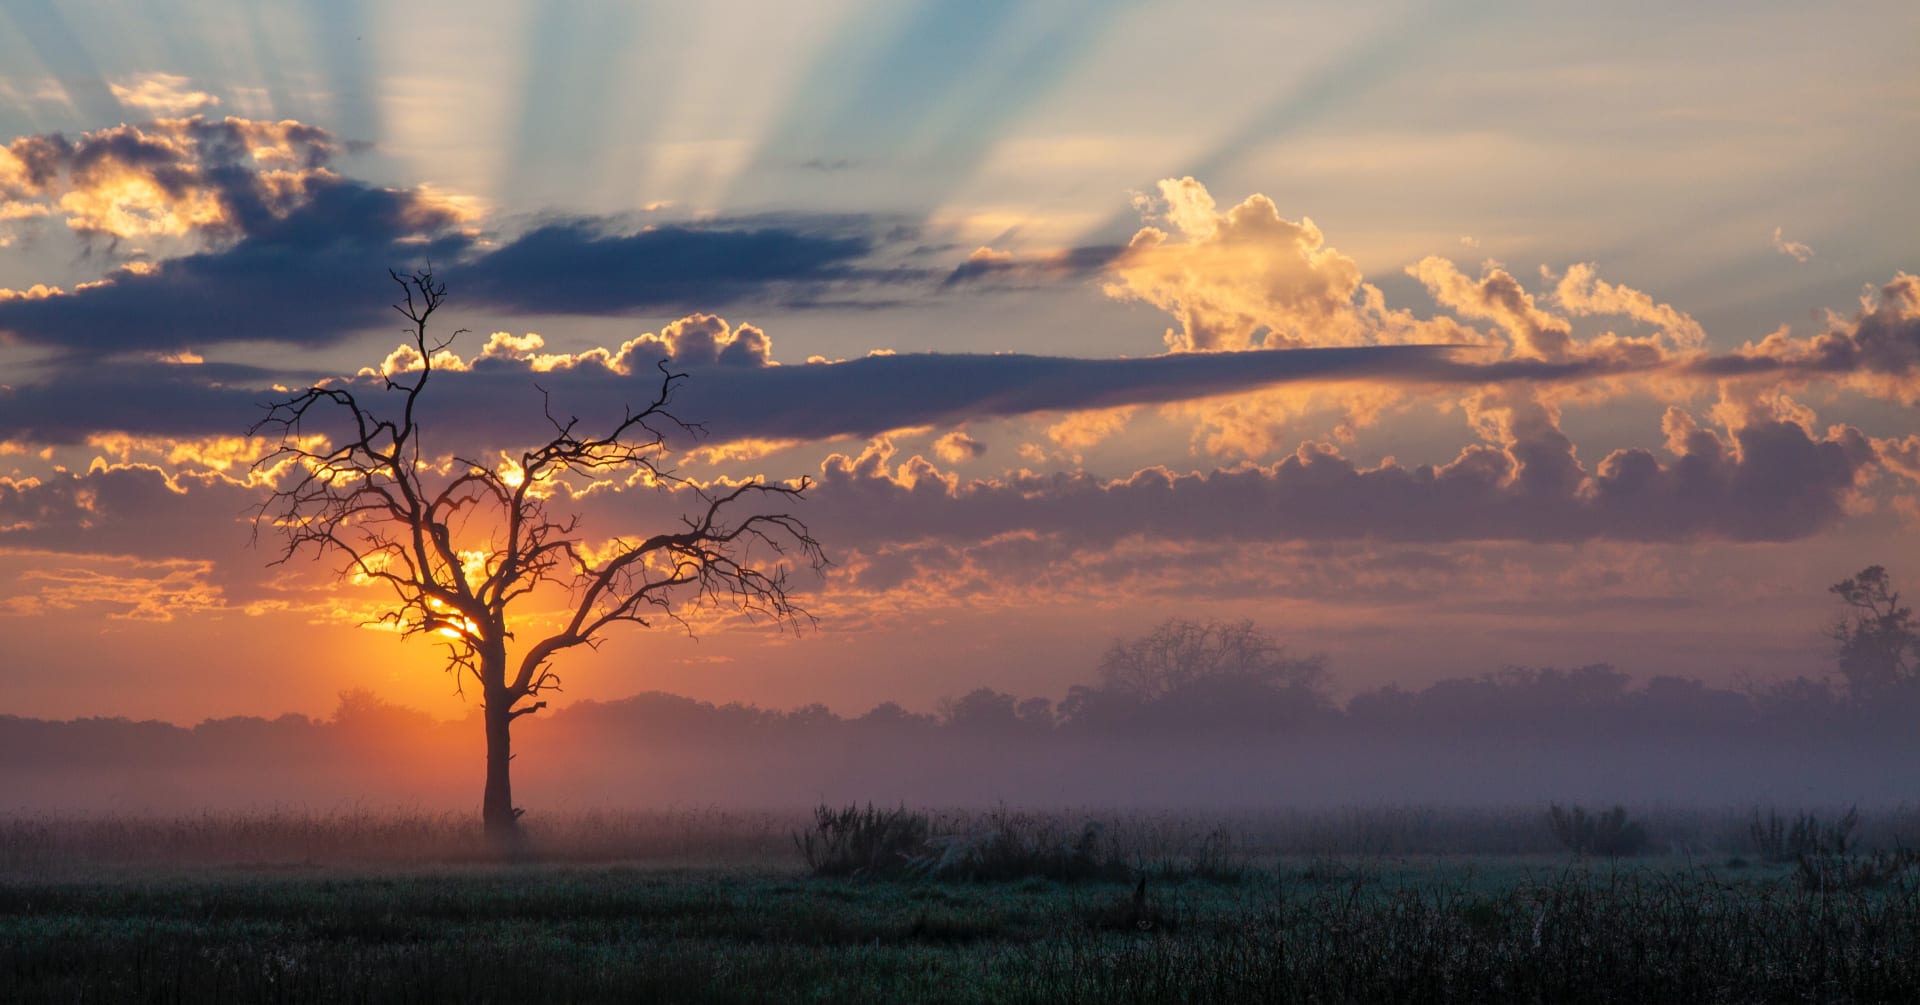 Botswana Safari: Where to go, where to stay and what to see